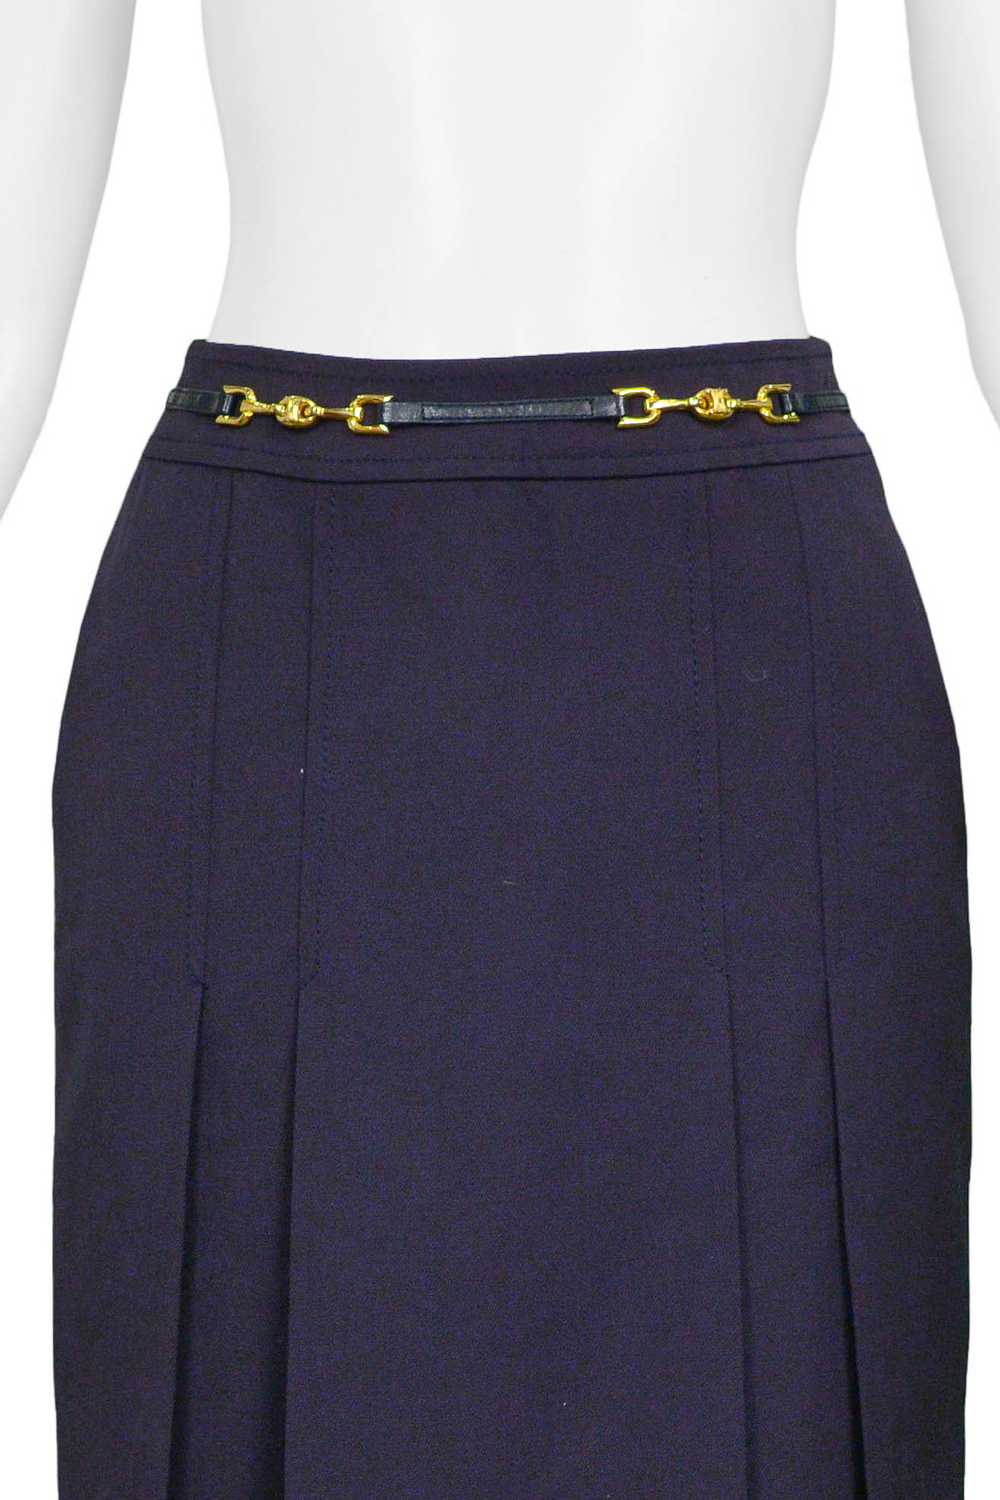 CELINE NAVY PURPLE WOOL SKIRT WITH GOLD LINK - image 5